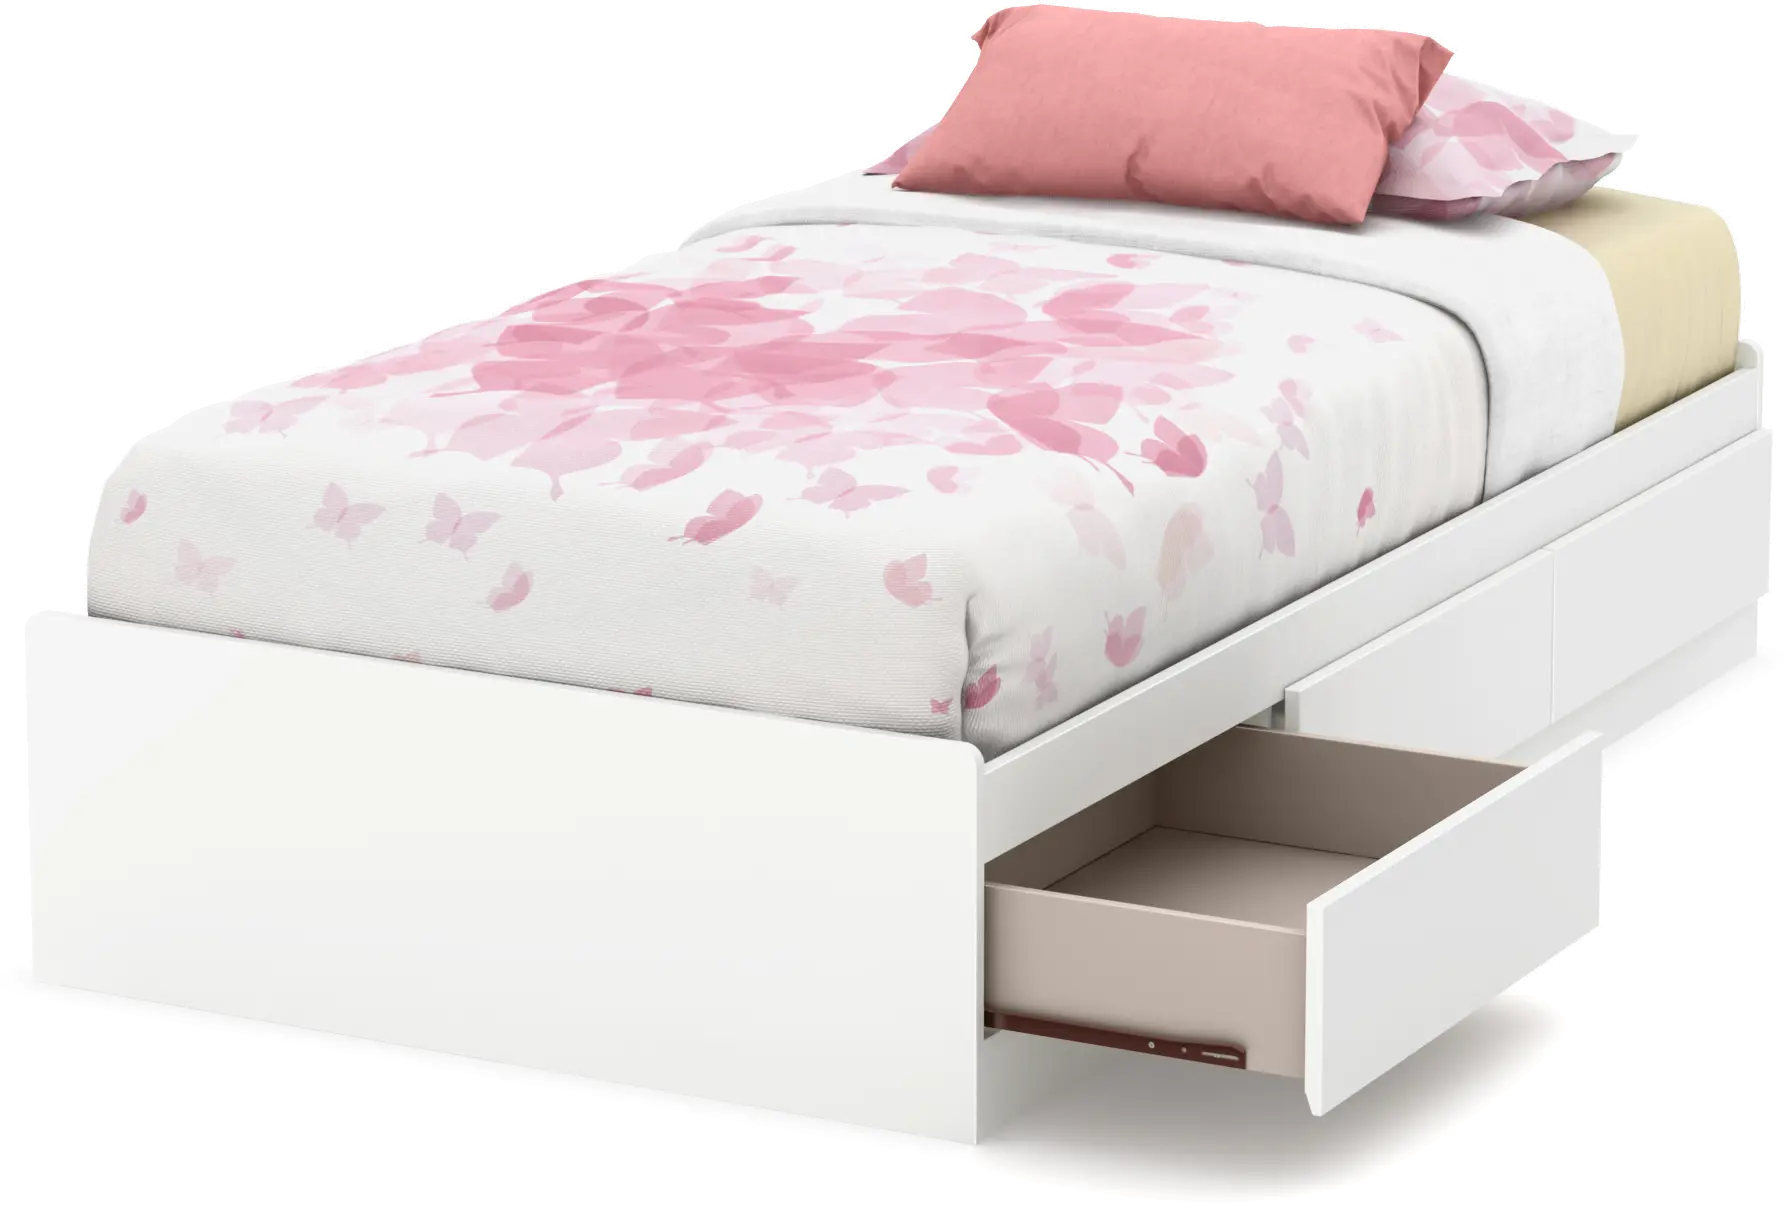 9018A1 White Twin Mates Bed with 3 Drawers (39 Inch) - So sku 9018A1